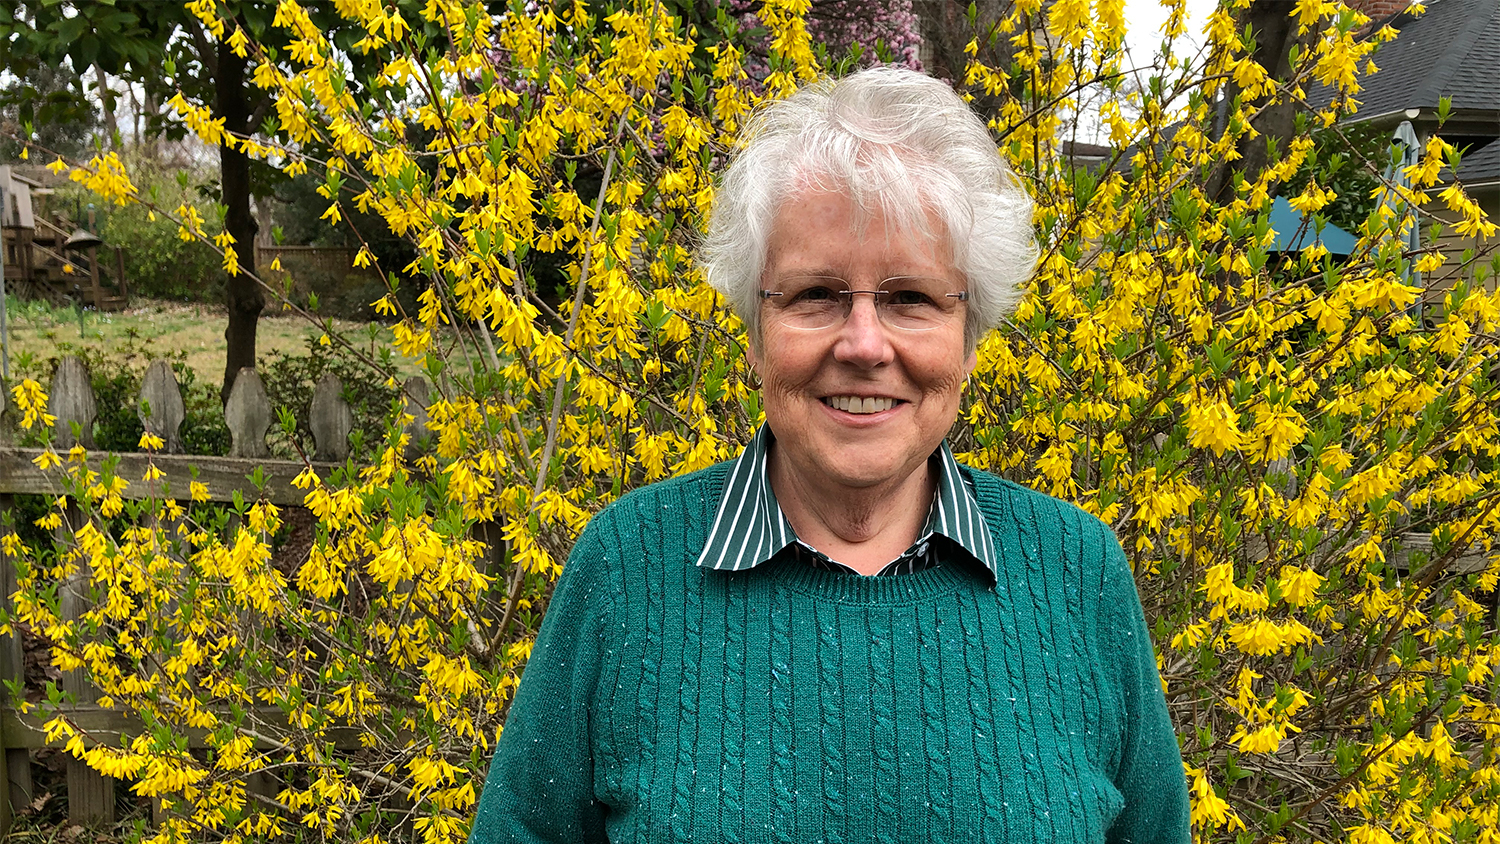 Mary smiles in front of yellow flowers - Women in Natural Resources: Forestry Professor Mary Watzin - Forestry and Environmental Resources NC State University